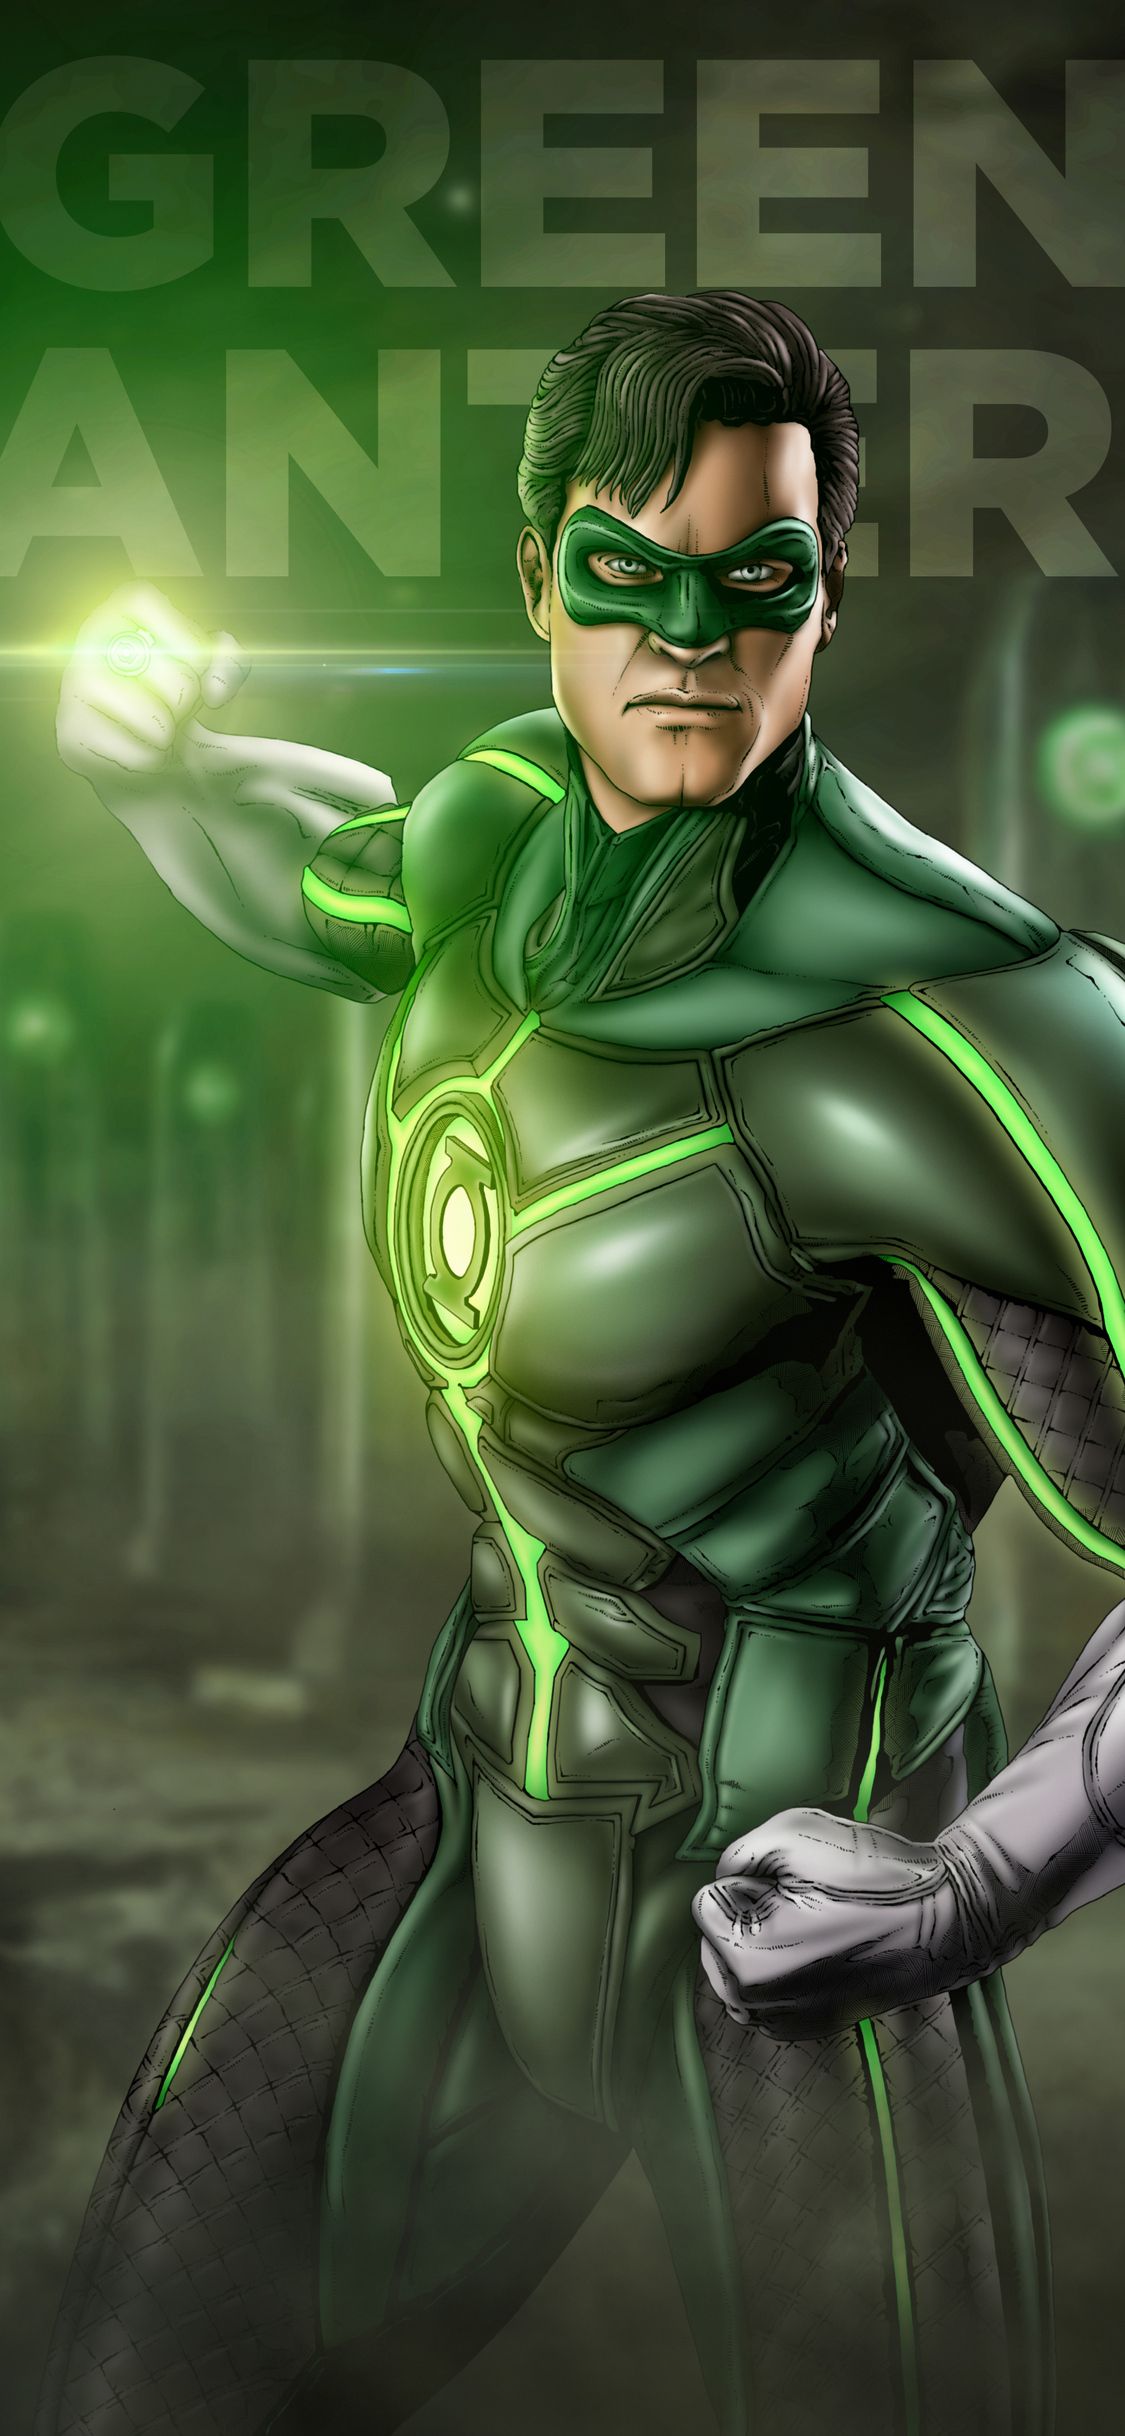 Green Lantern Artwork iPhone XS, iPhone iPhone X HD 4k Wallpaper, Image, Background, Photo and Picture